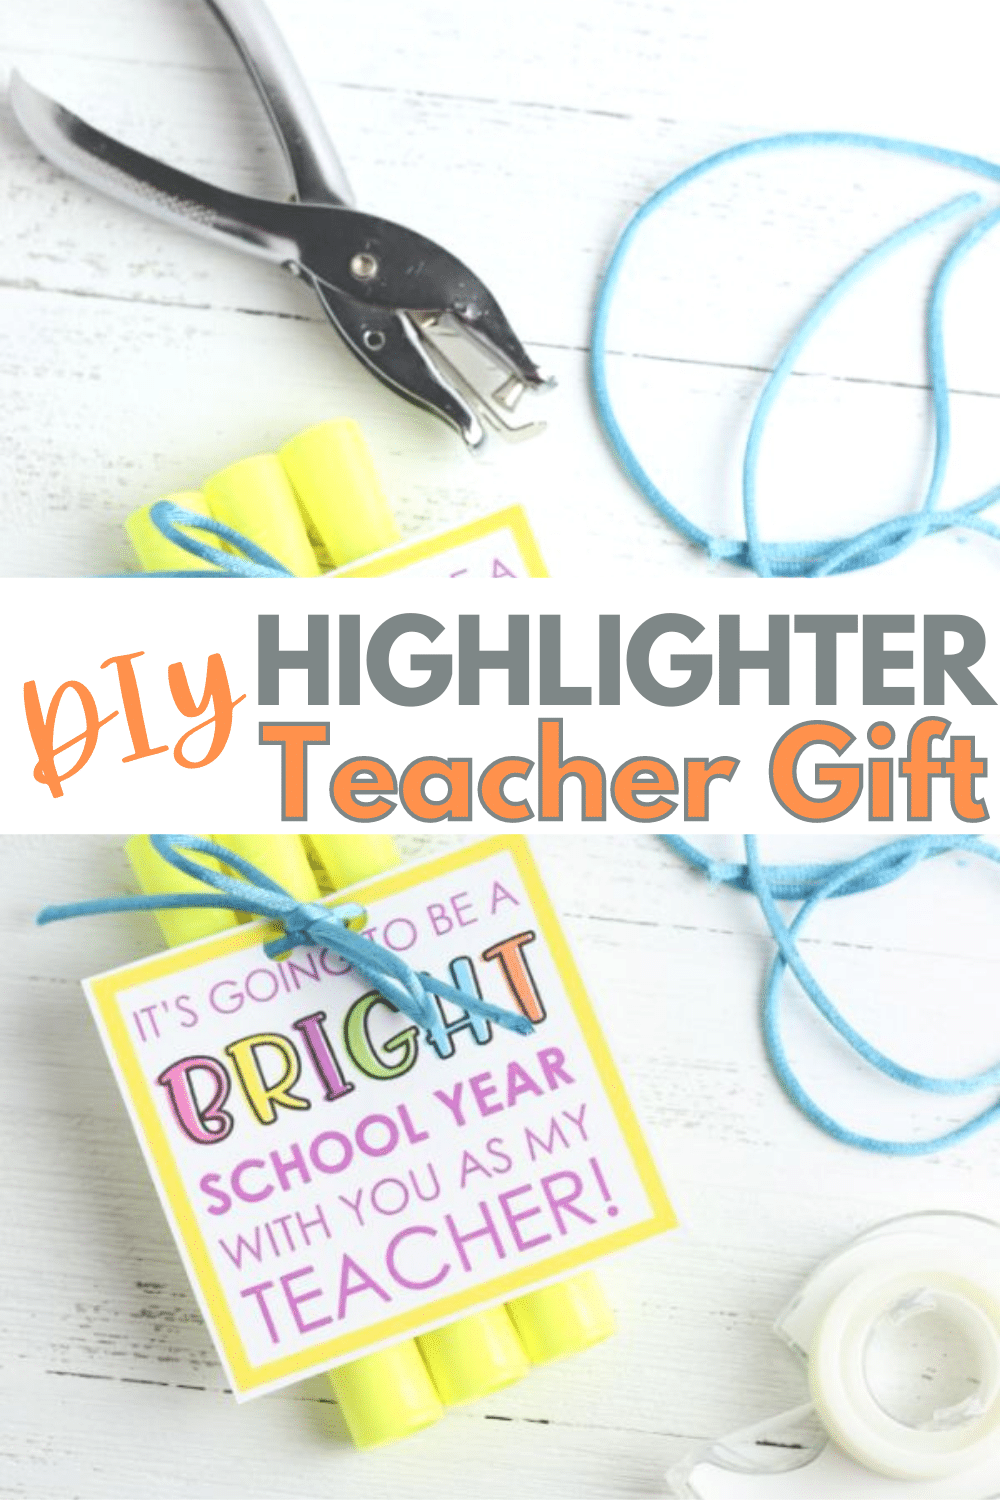 A Highlighter Teacher Gift is easy to make with this free printable gift tag. Attach the tag to some highlighters for a great teacher gift. #teachergift #printables #printablegifttags via @wondermomwannab